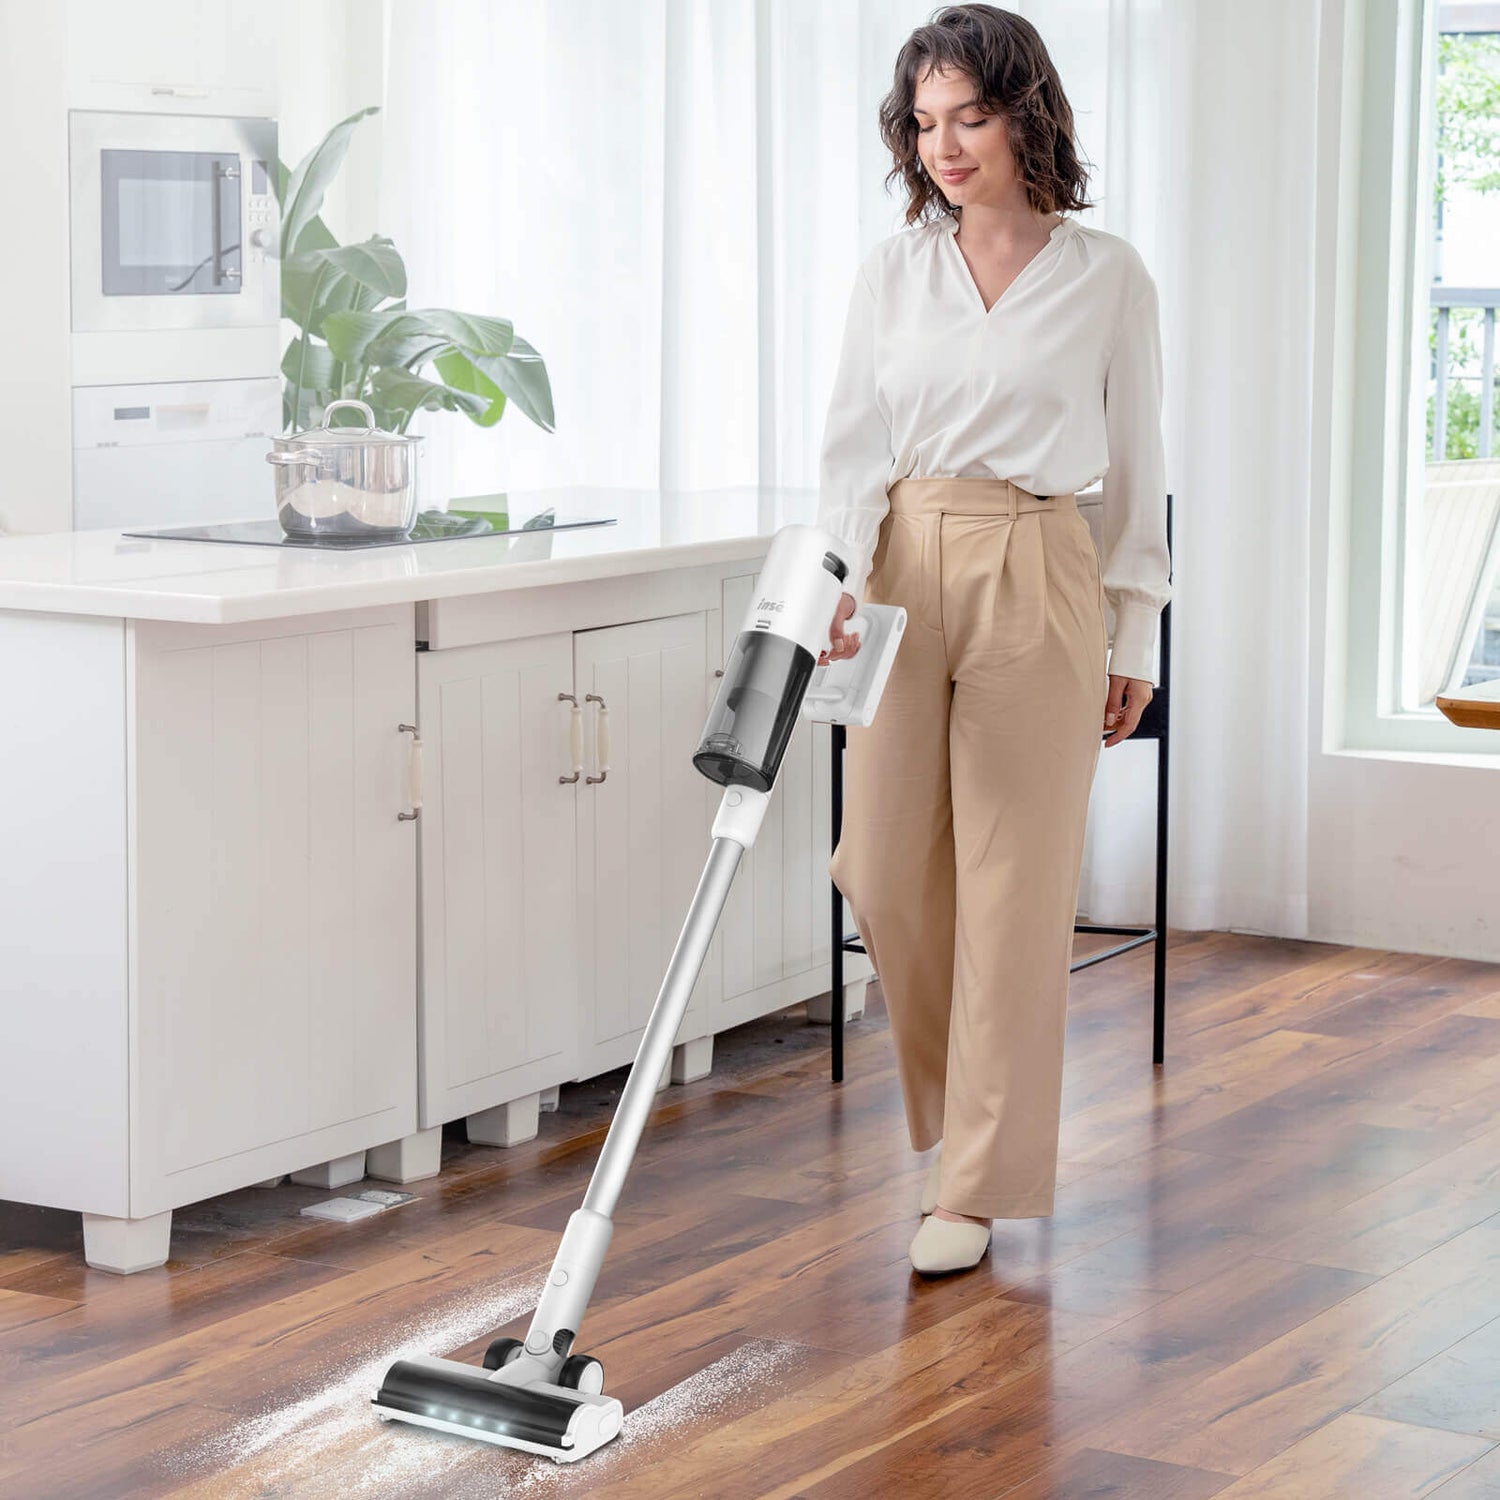 INSE V120 cordless vacuum for hardwood floors for home-inselife.com